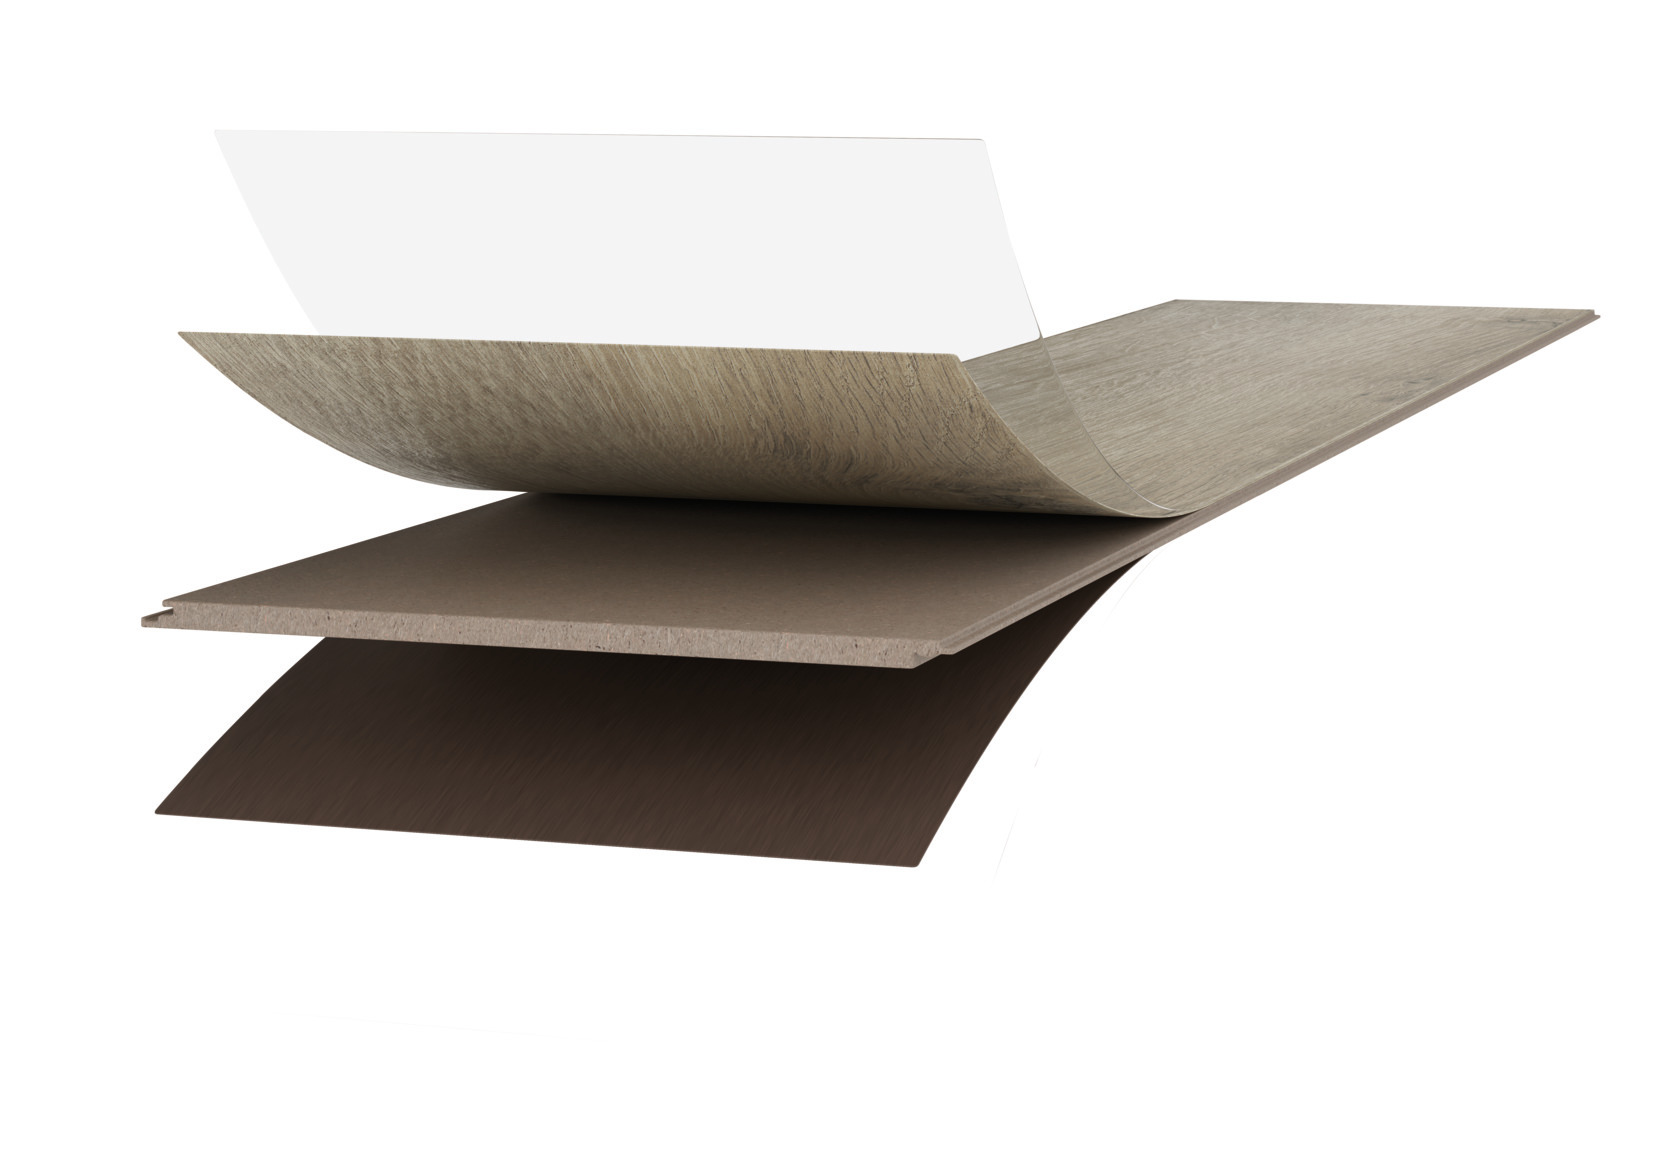 a. Overlay 
b. Decorative paper 
c. HDF middle layer 
d. Backing for dimensional stability